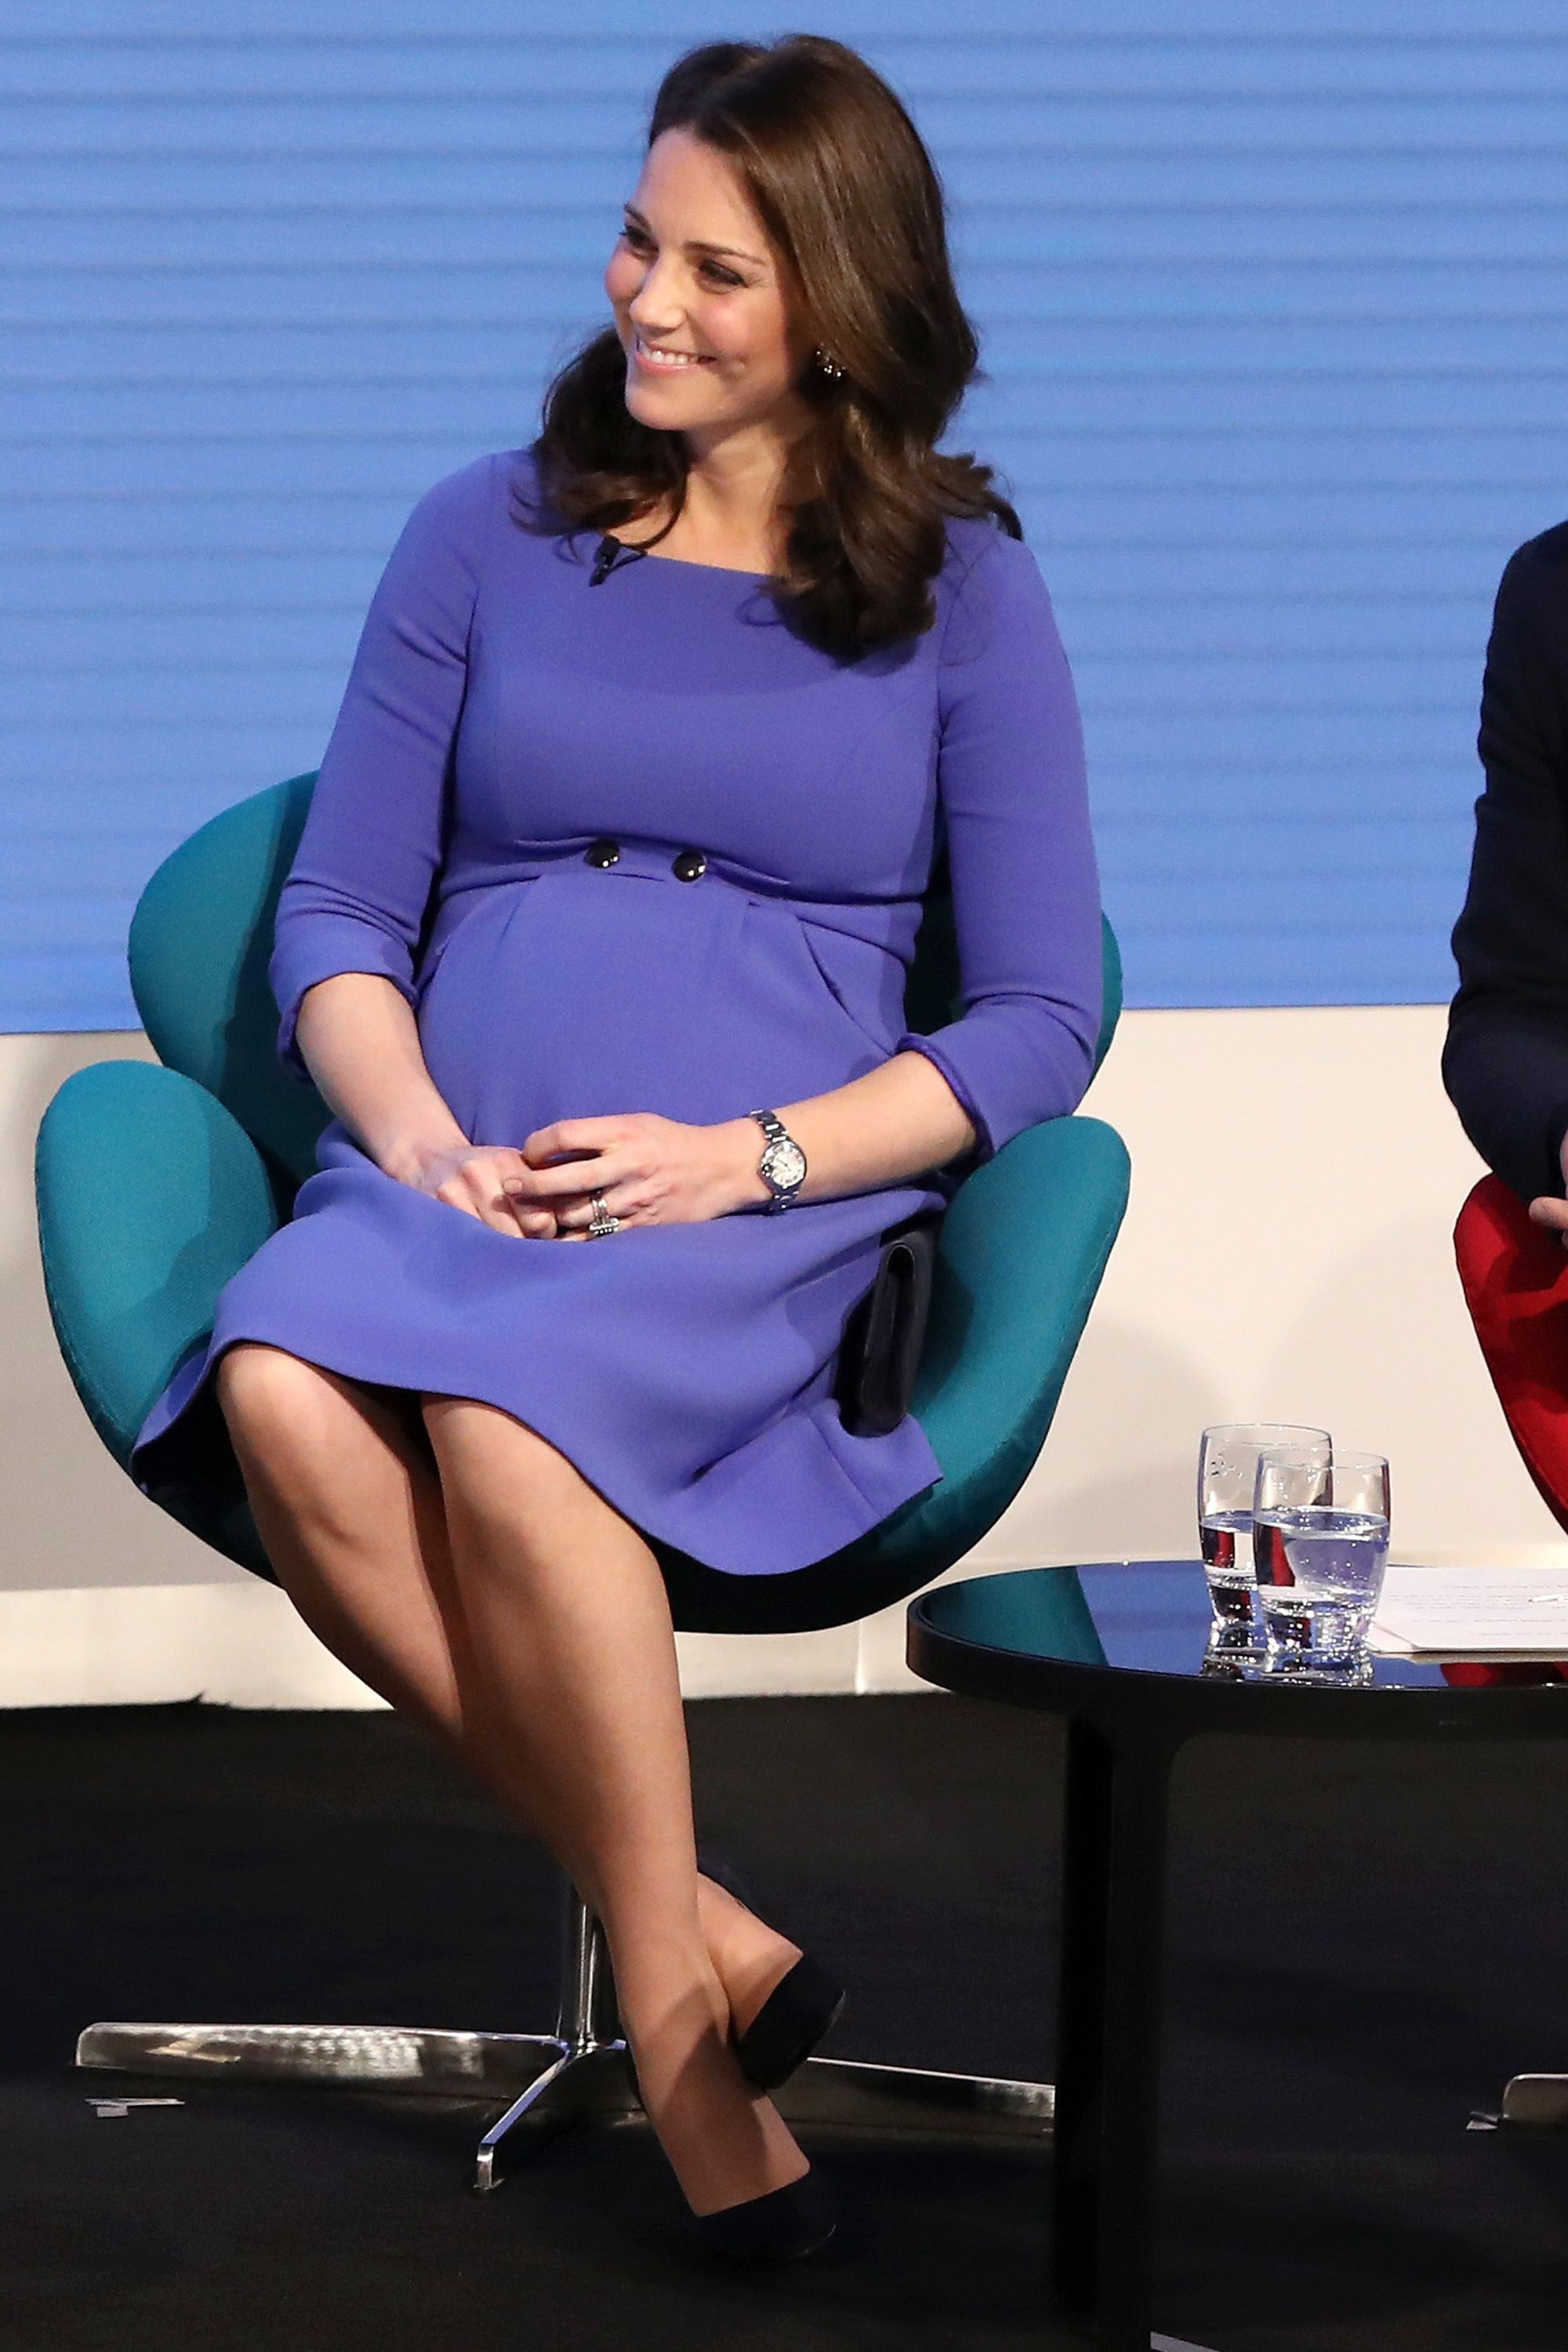 hbz-kate-middleton-maternity-style-022818-gettyimages-925290810-1522866999